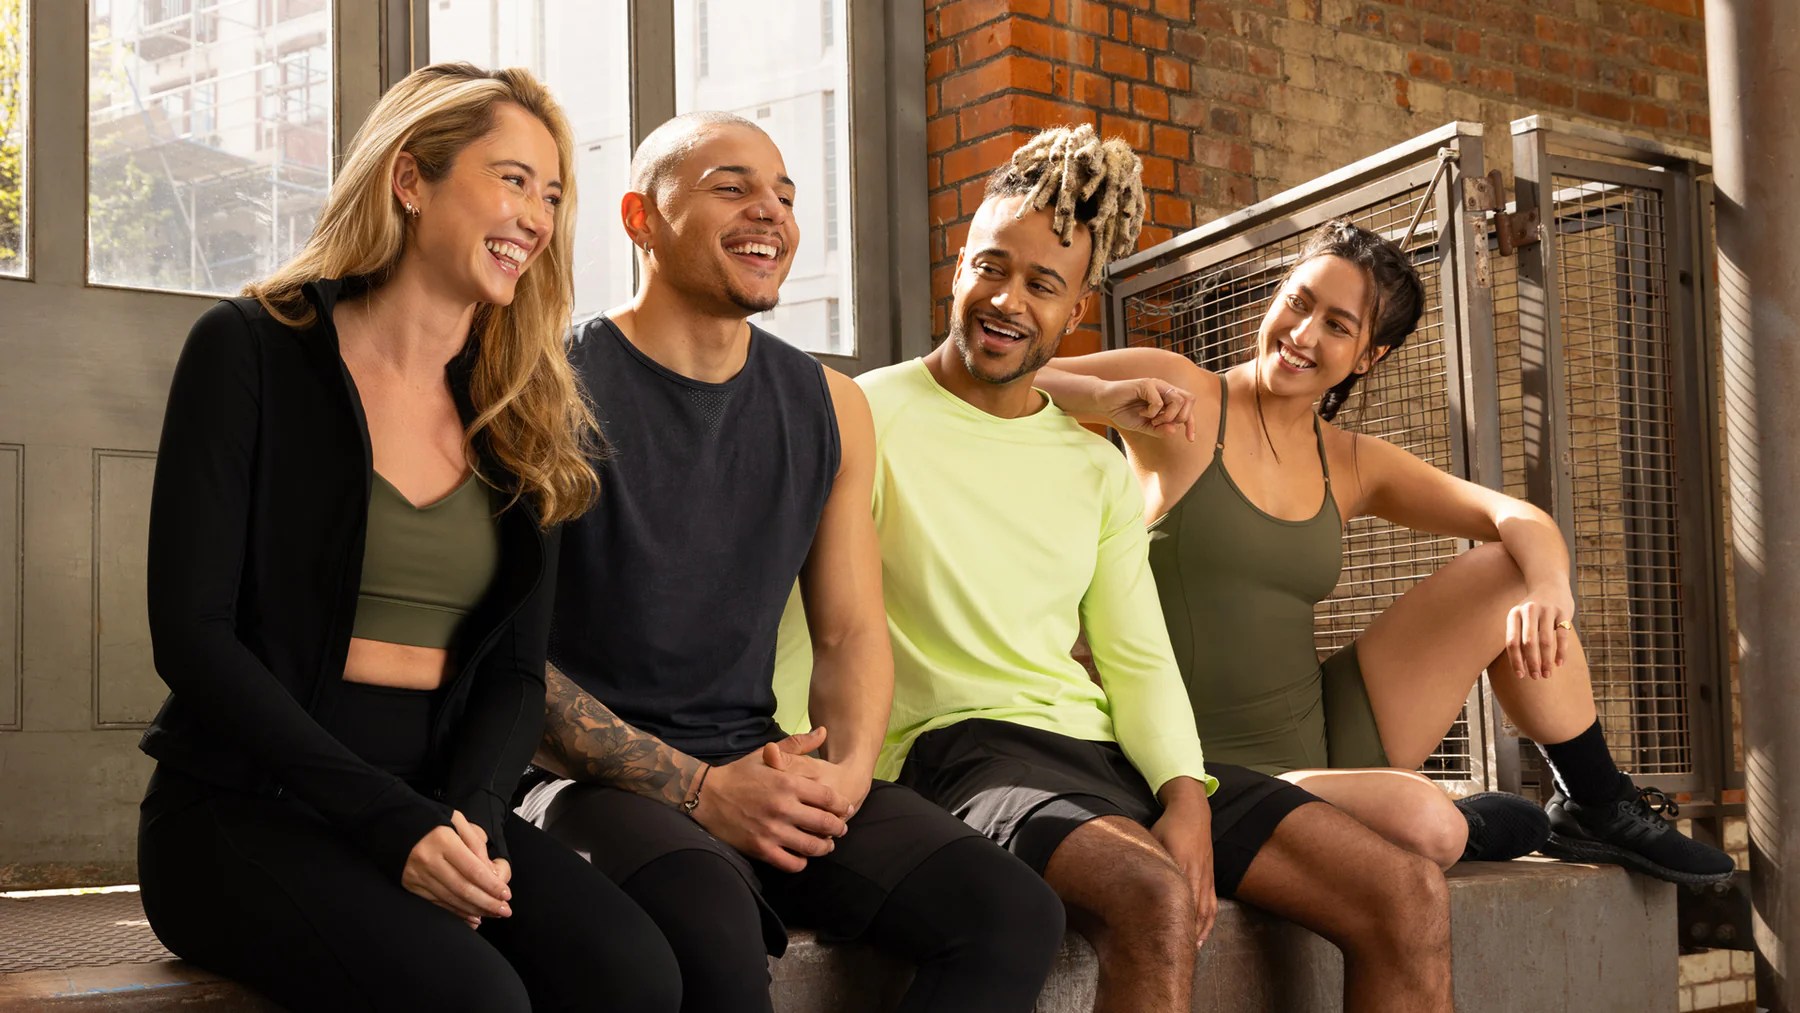 Look and feel stylish while working out with 1Rebel's new fitness collection